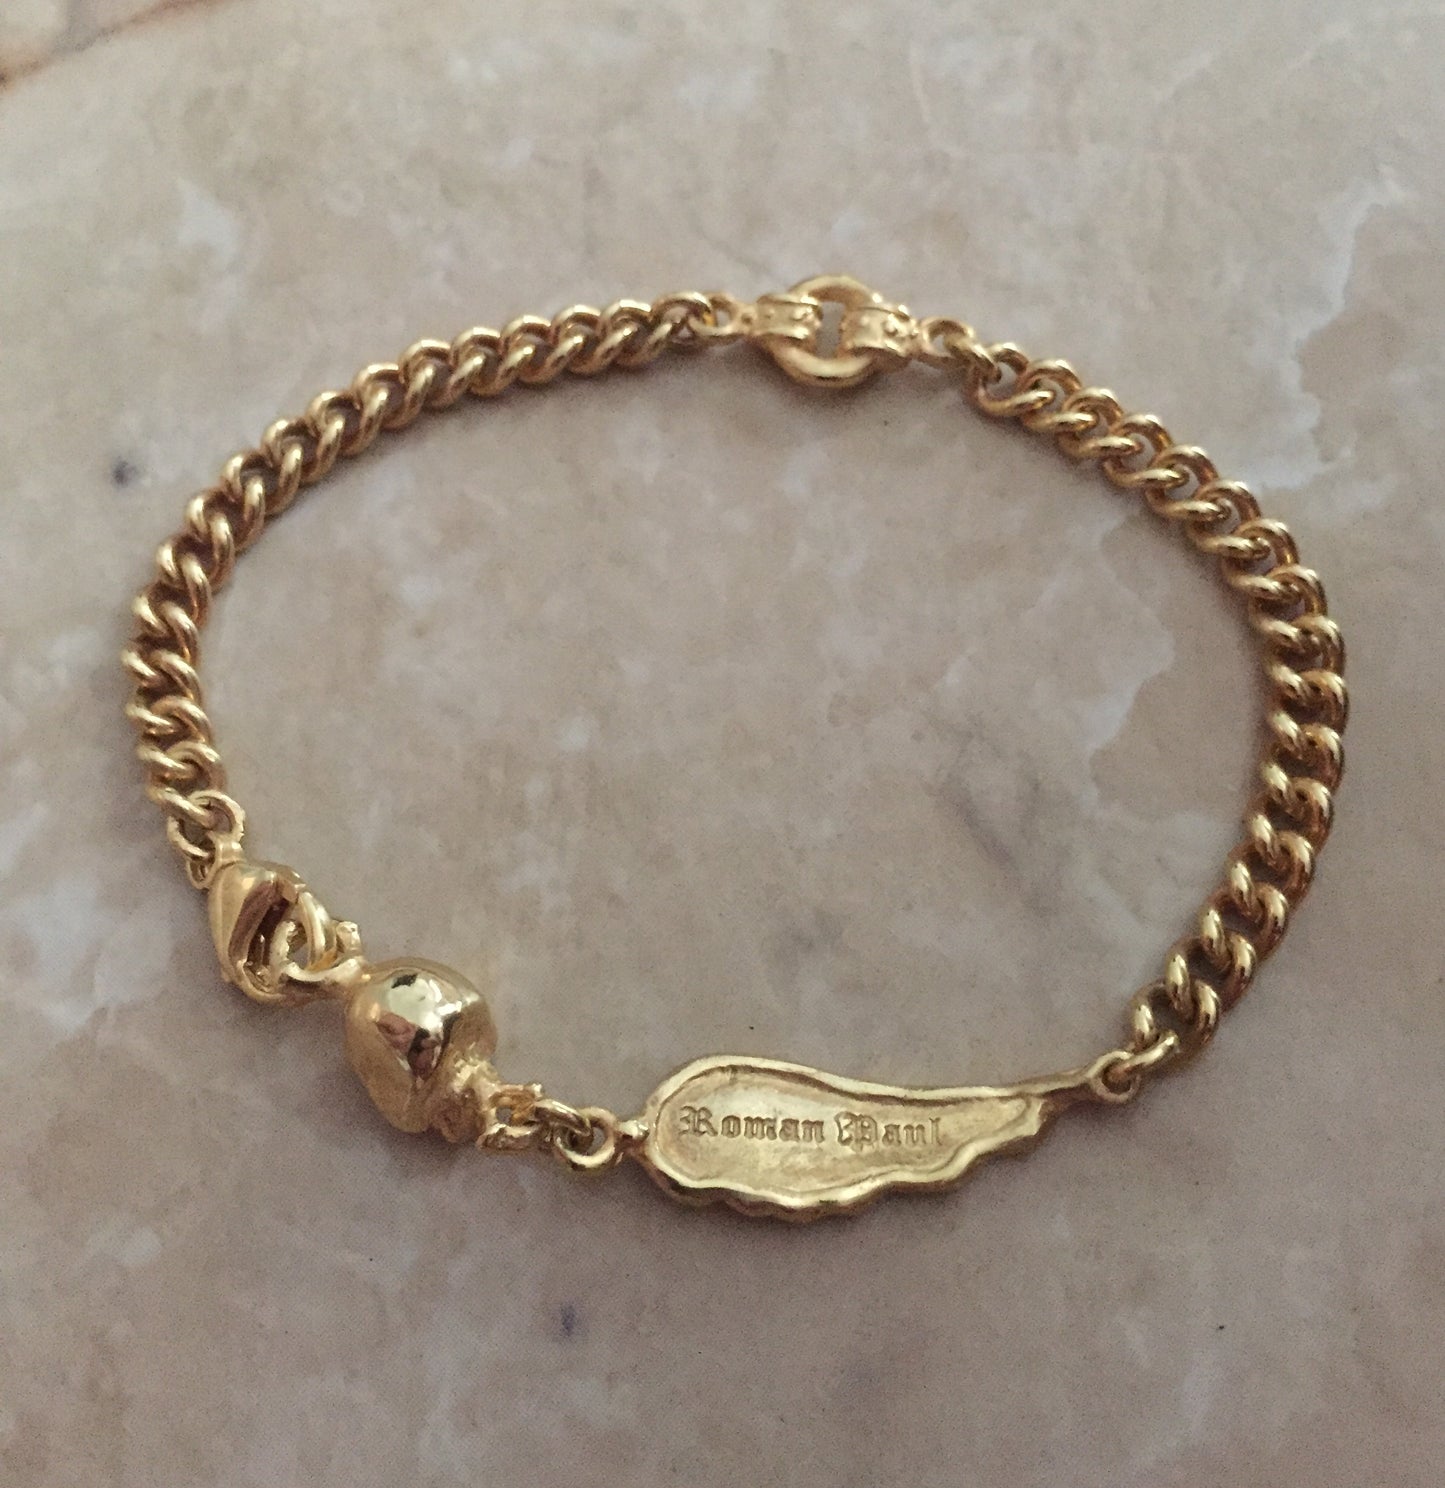 Bracelet - Sterling silver, 18k gold plated - Skull and wing